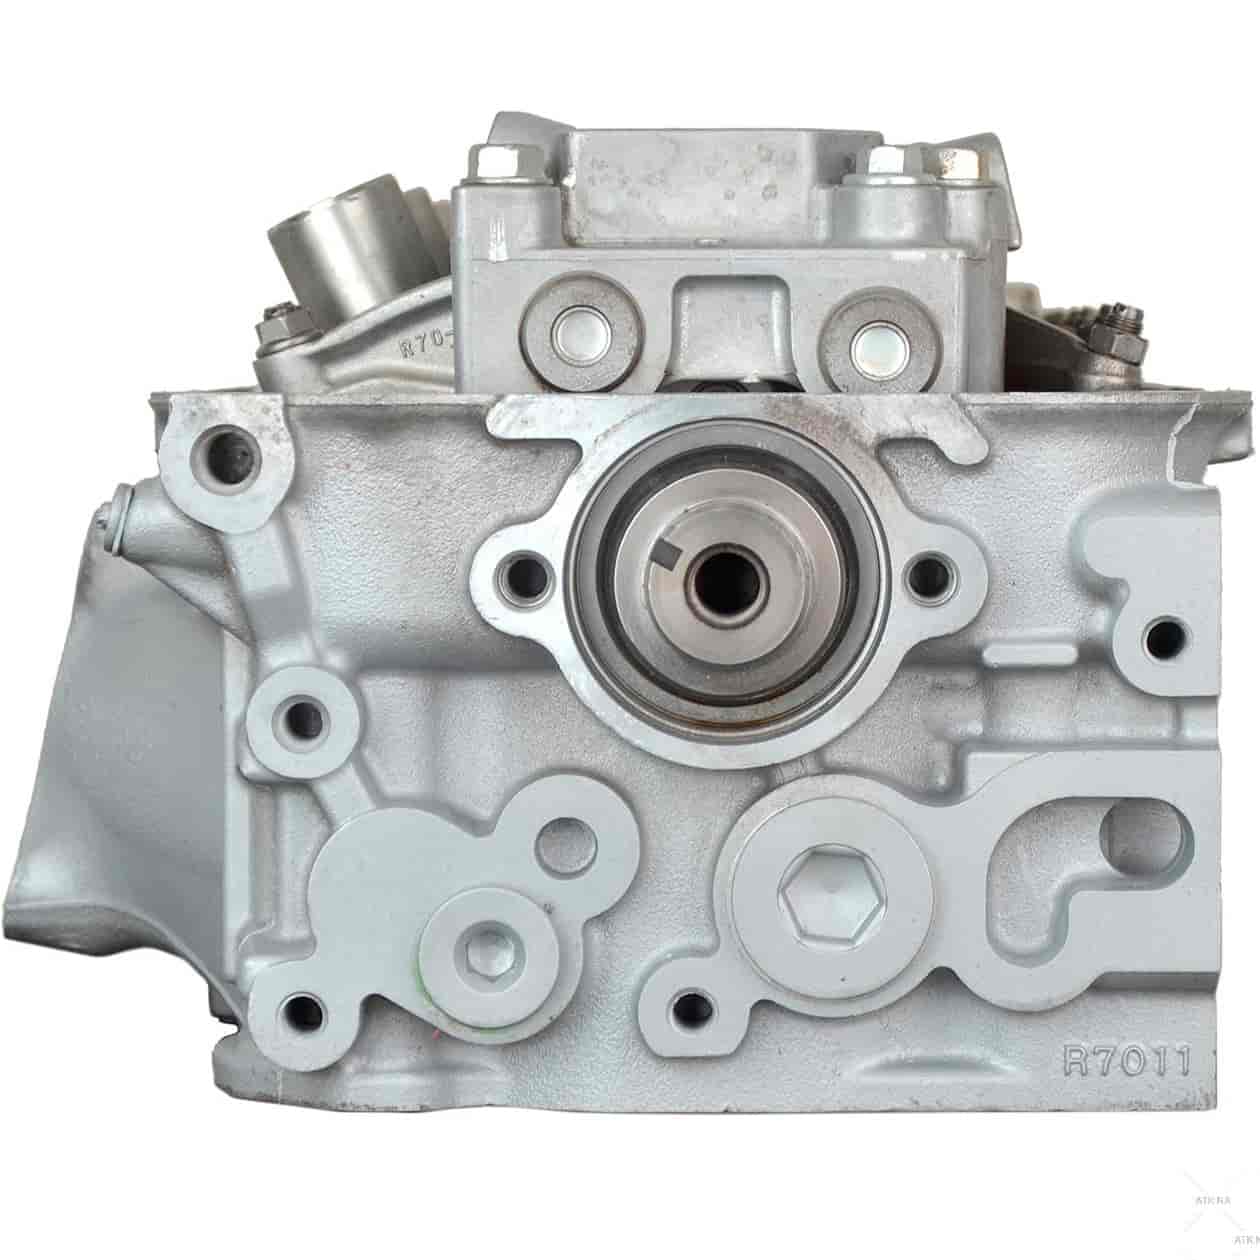 Remanufactured Cylinder Head for 2009-2013 Acura/Honda with 3.5L/3.7L V6